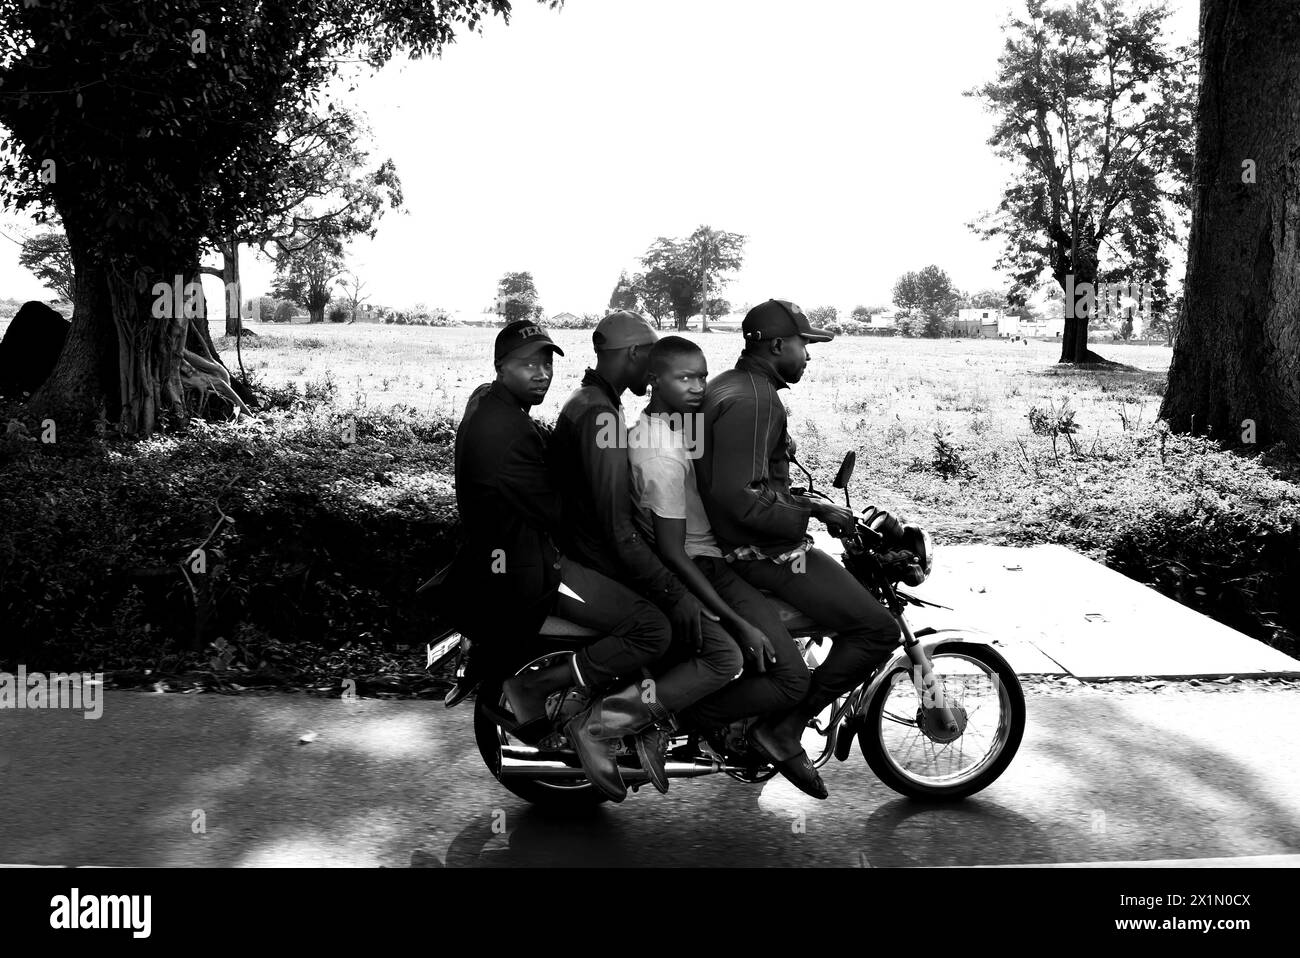 Youthful adventure: Four friends ride a motorcycle along a Ugandan road in the morning, one gazes at the camera. Black and white shot from a car, with Stock Photo